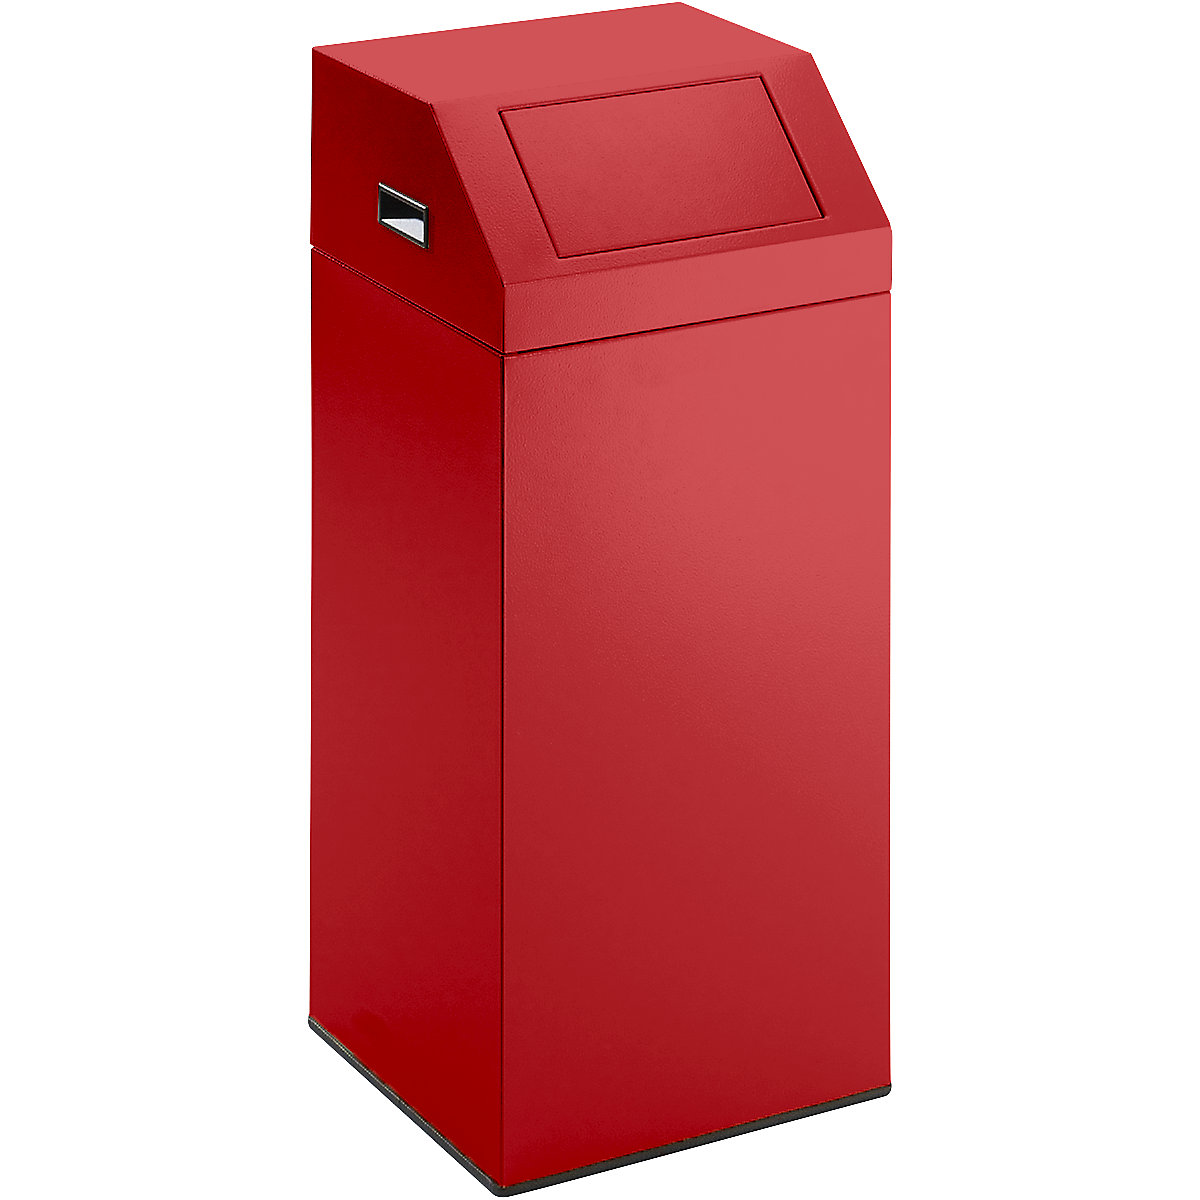 EUROKRAFTpro – Recyclable waste collector, capacity 76 l, WxHxD 380 x 890 x 380 mm, flame red